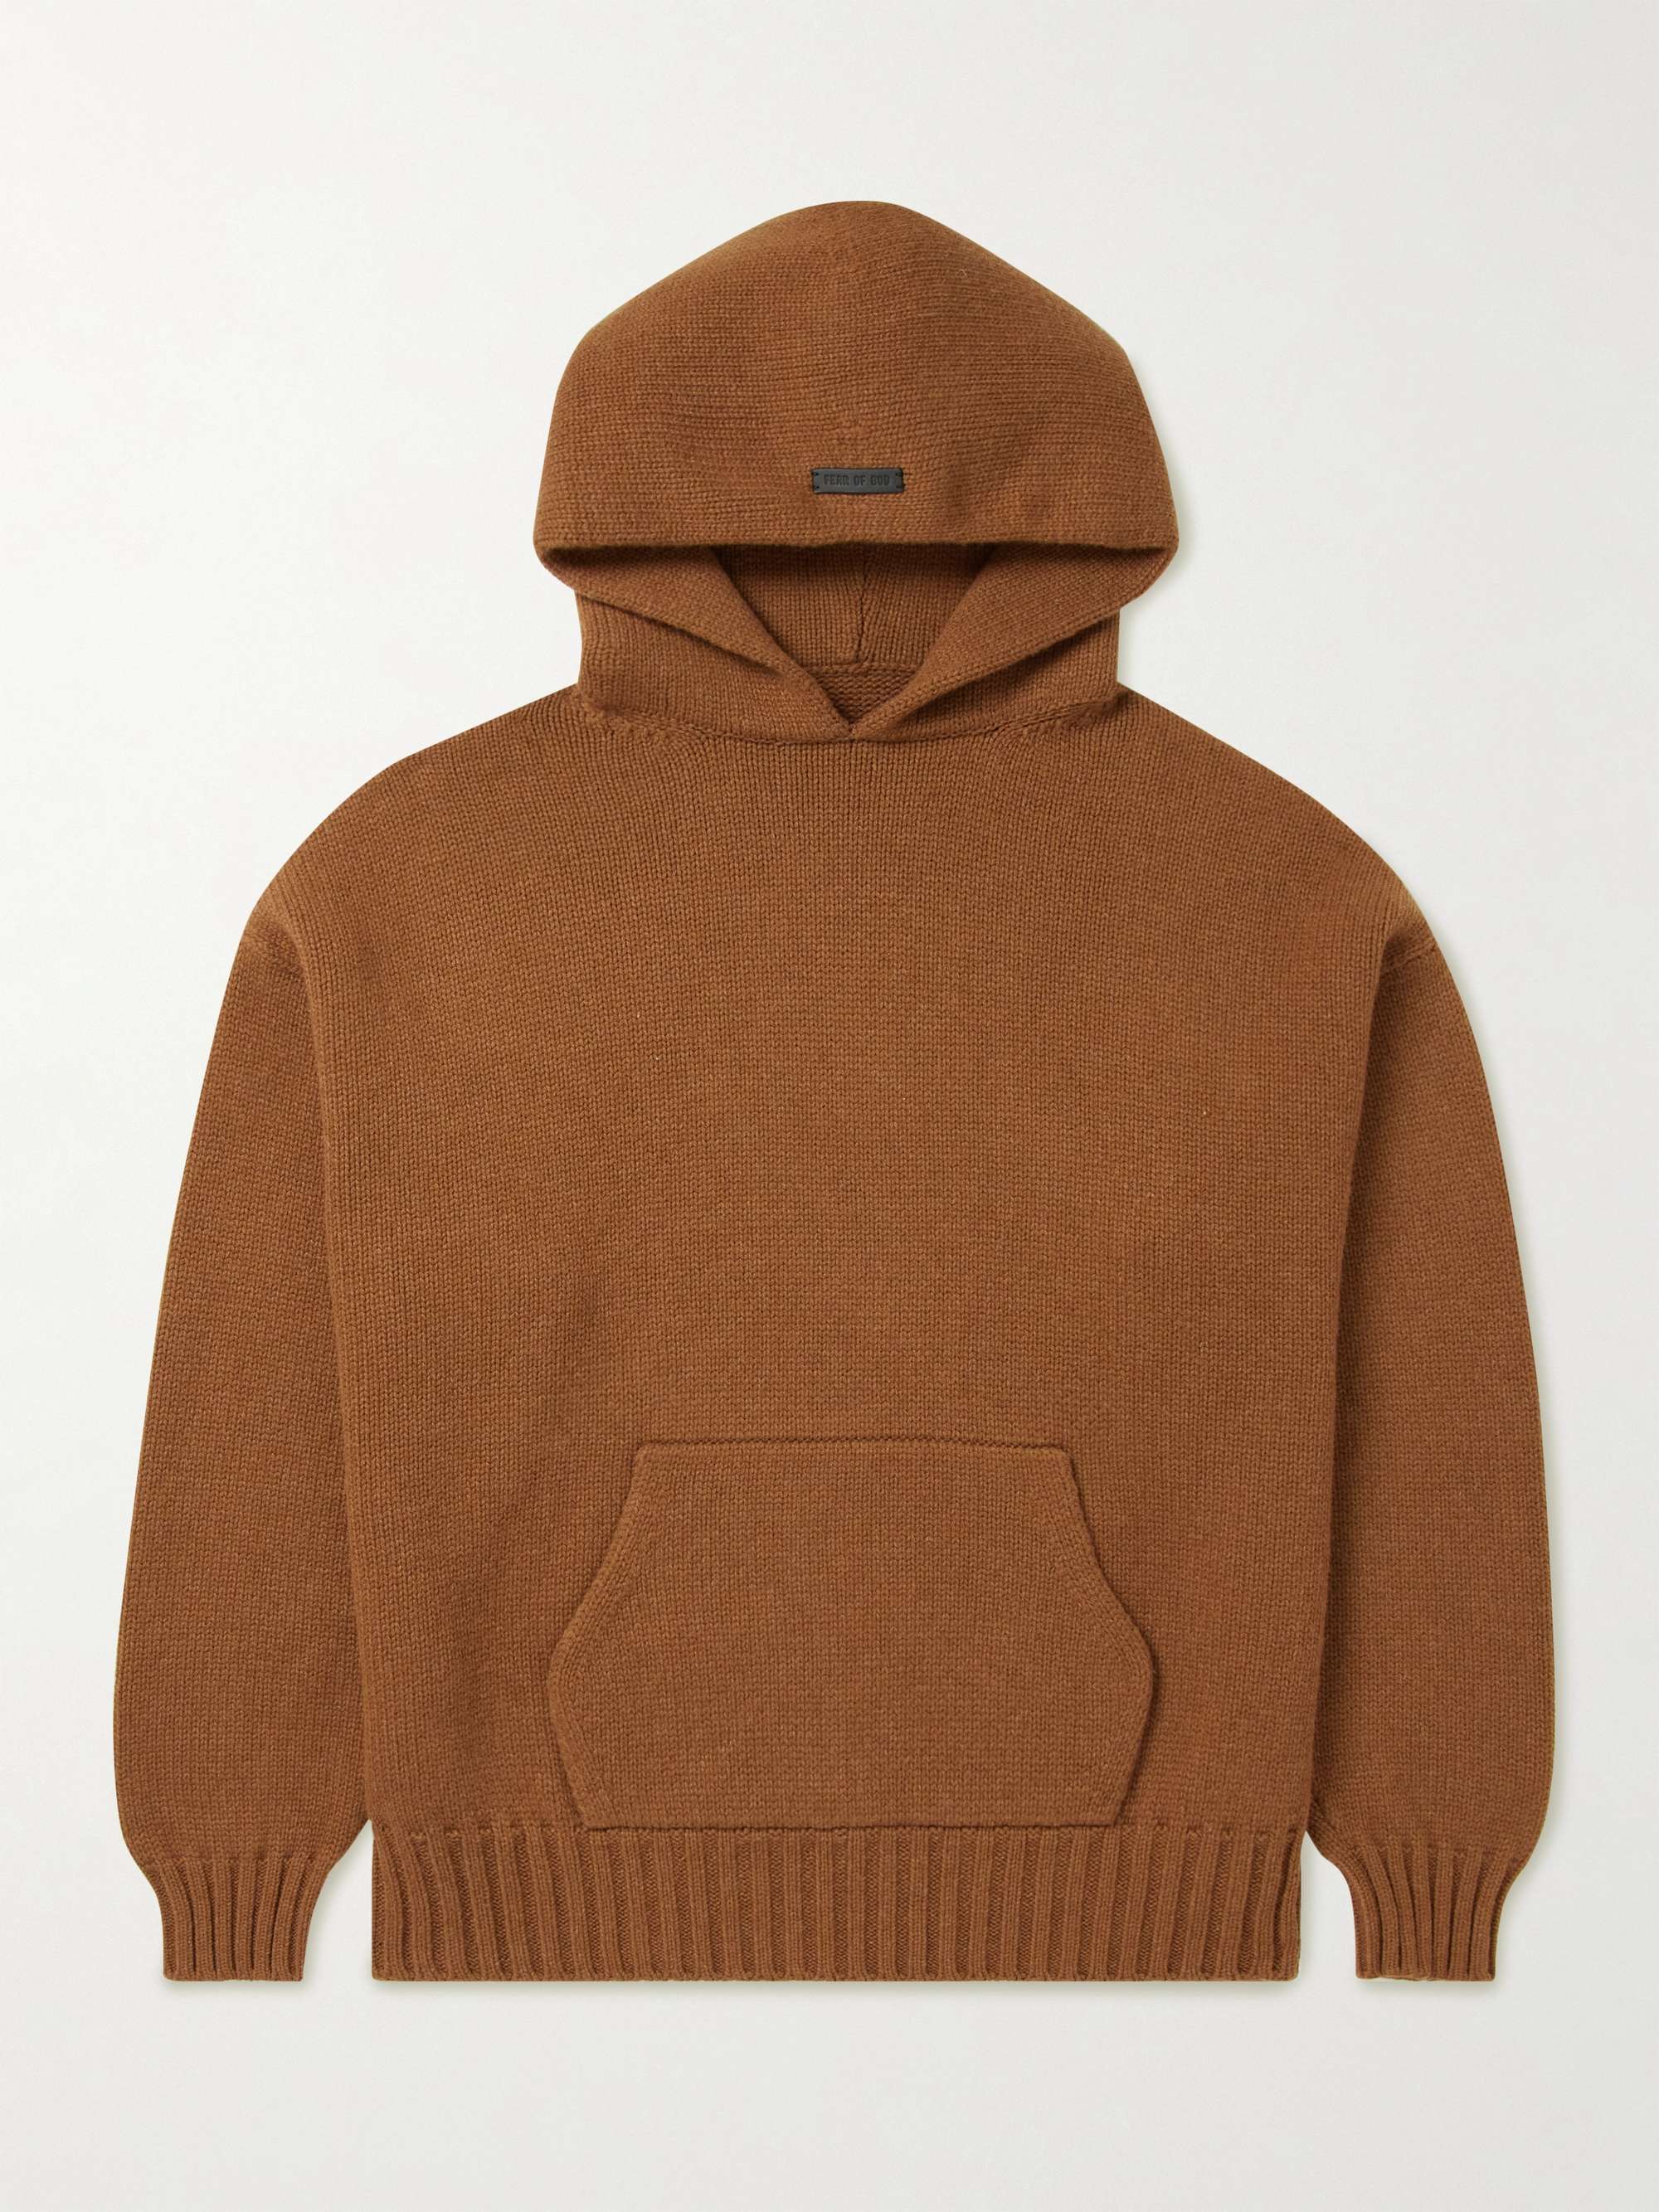 FEAR OF GOD Wool and Cashmere-Blend Hoodie